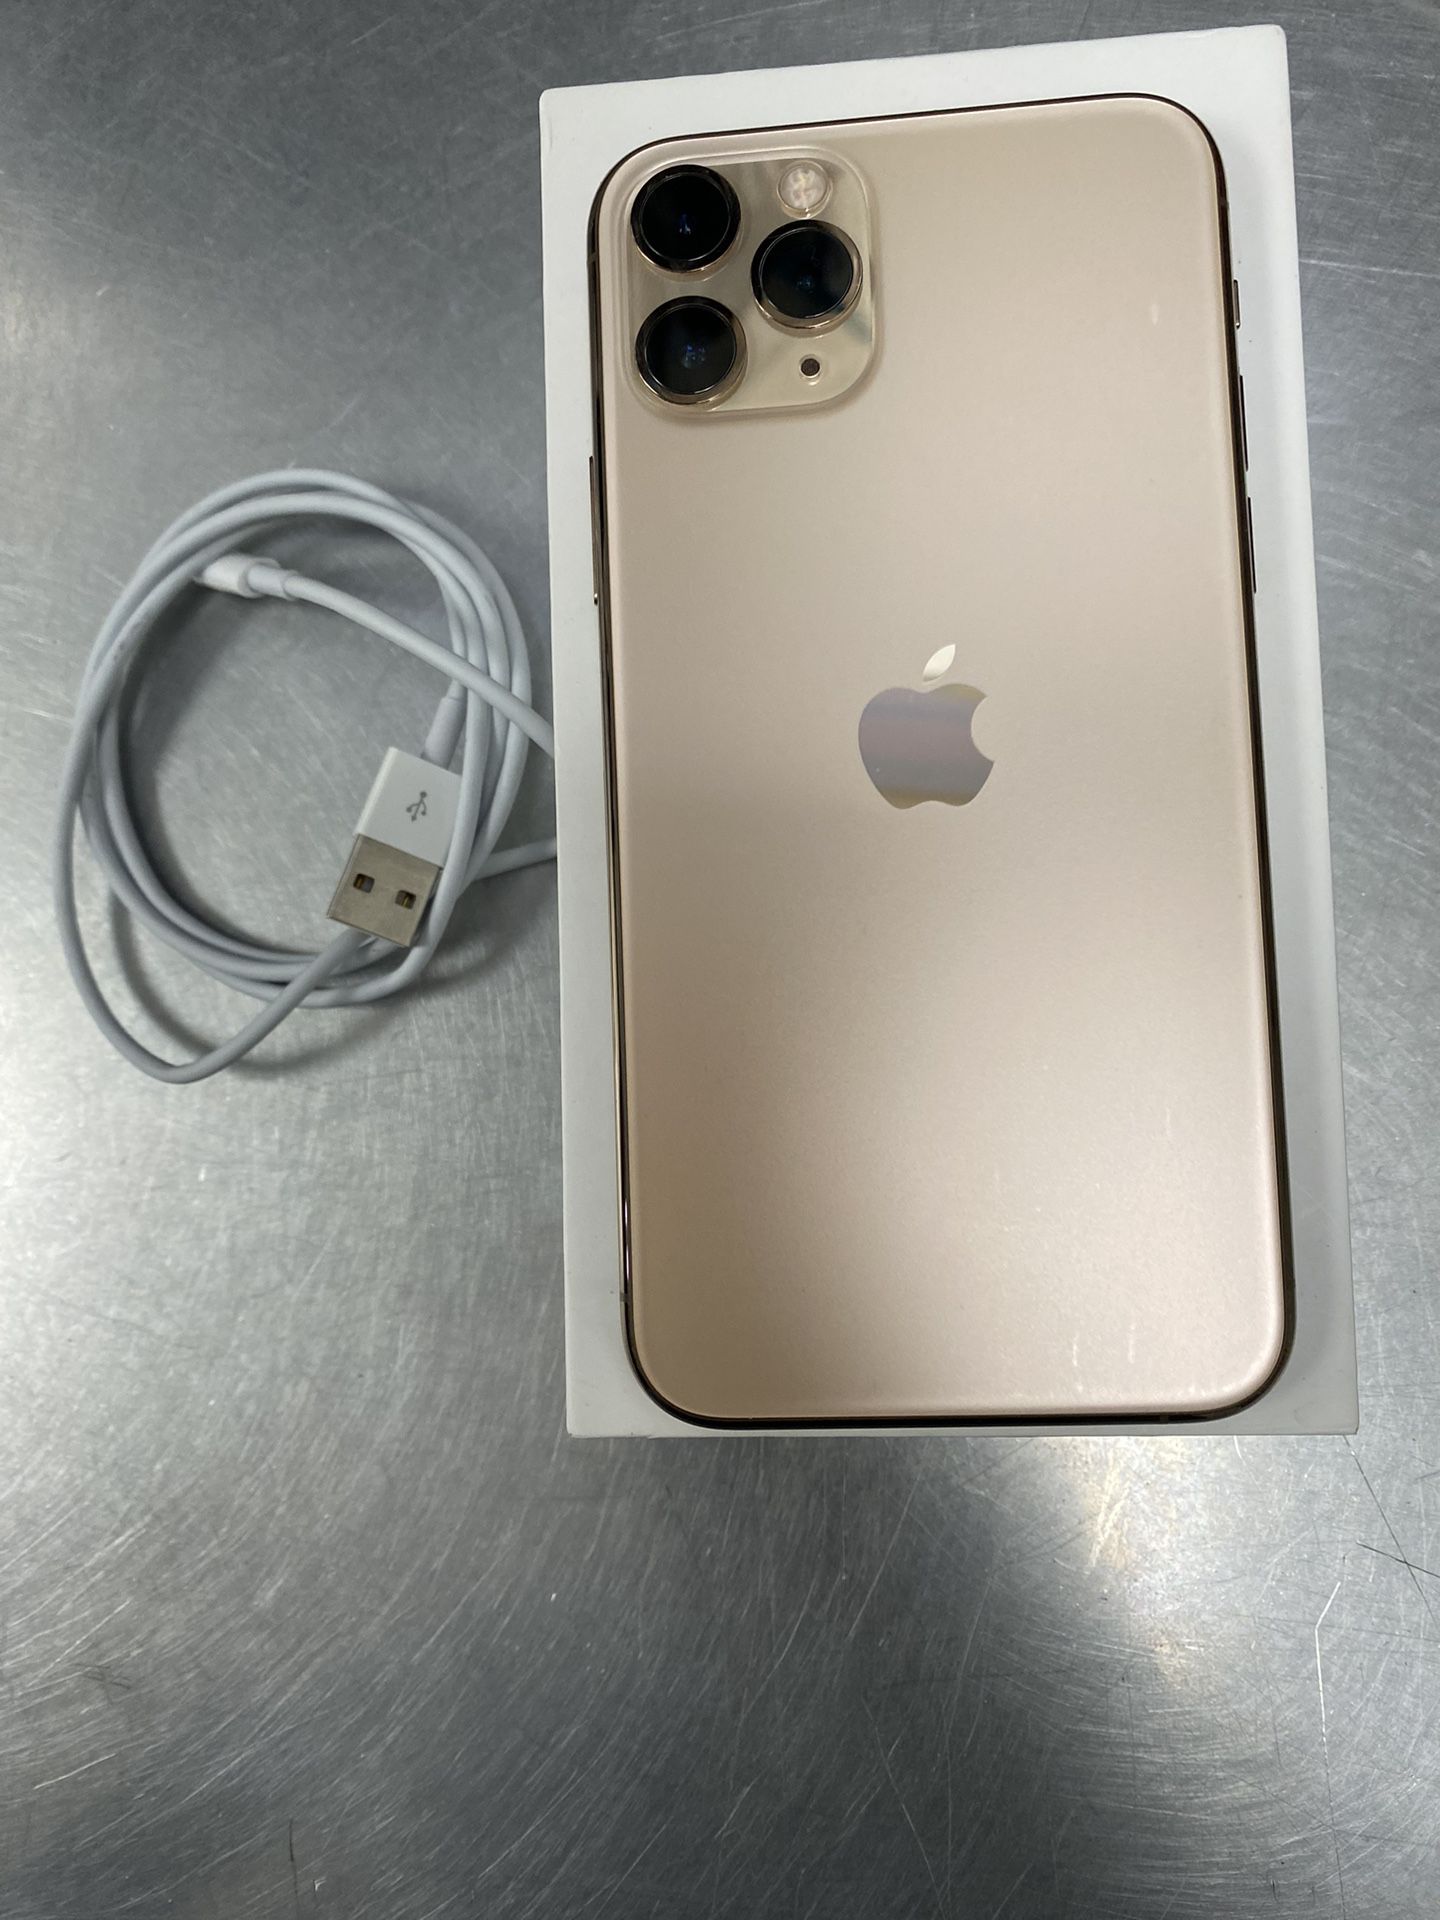 iPhone 11 Pro 64g Unlocked for Sale in Chicago, IL - OfferUp